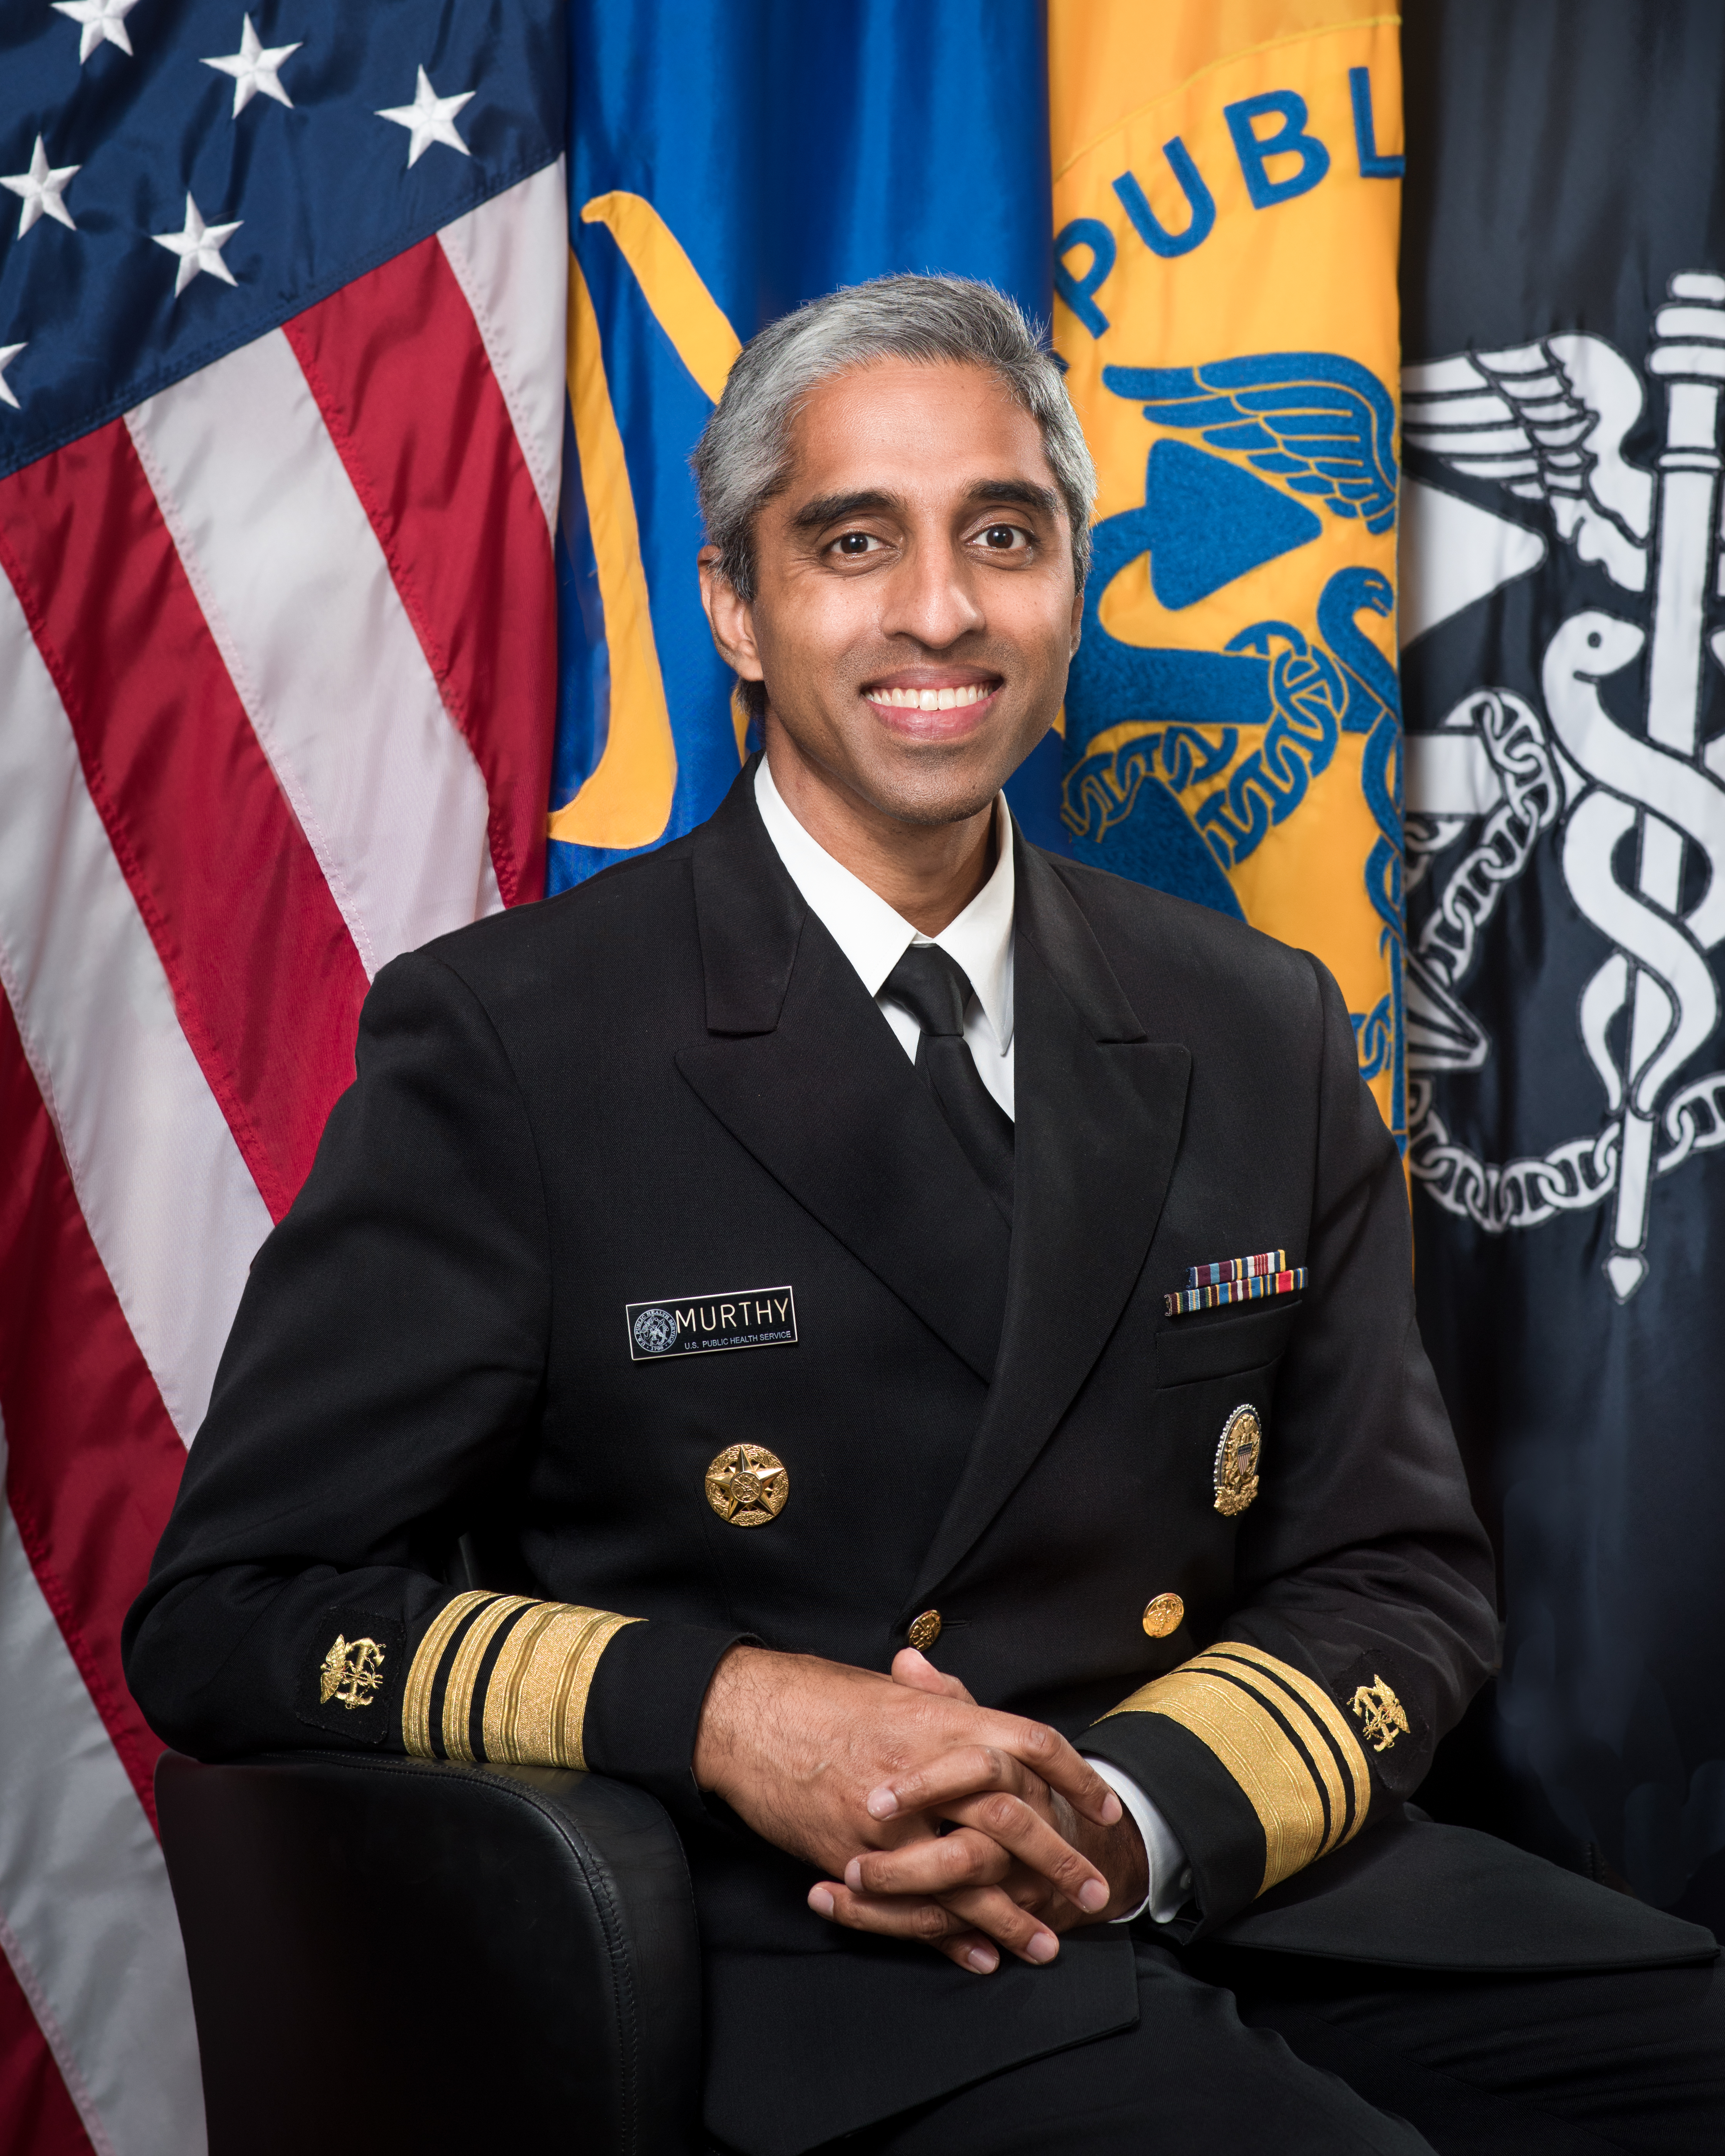 U.S. Surgeon General Urges Higher Ed Leaders to Increase Support for Mental Health, Community Gathers to Workshop Solutions